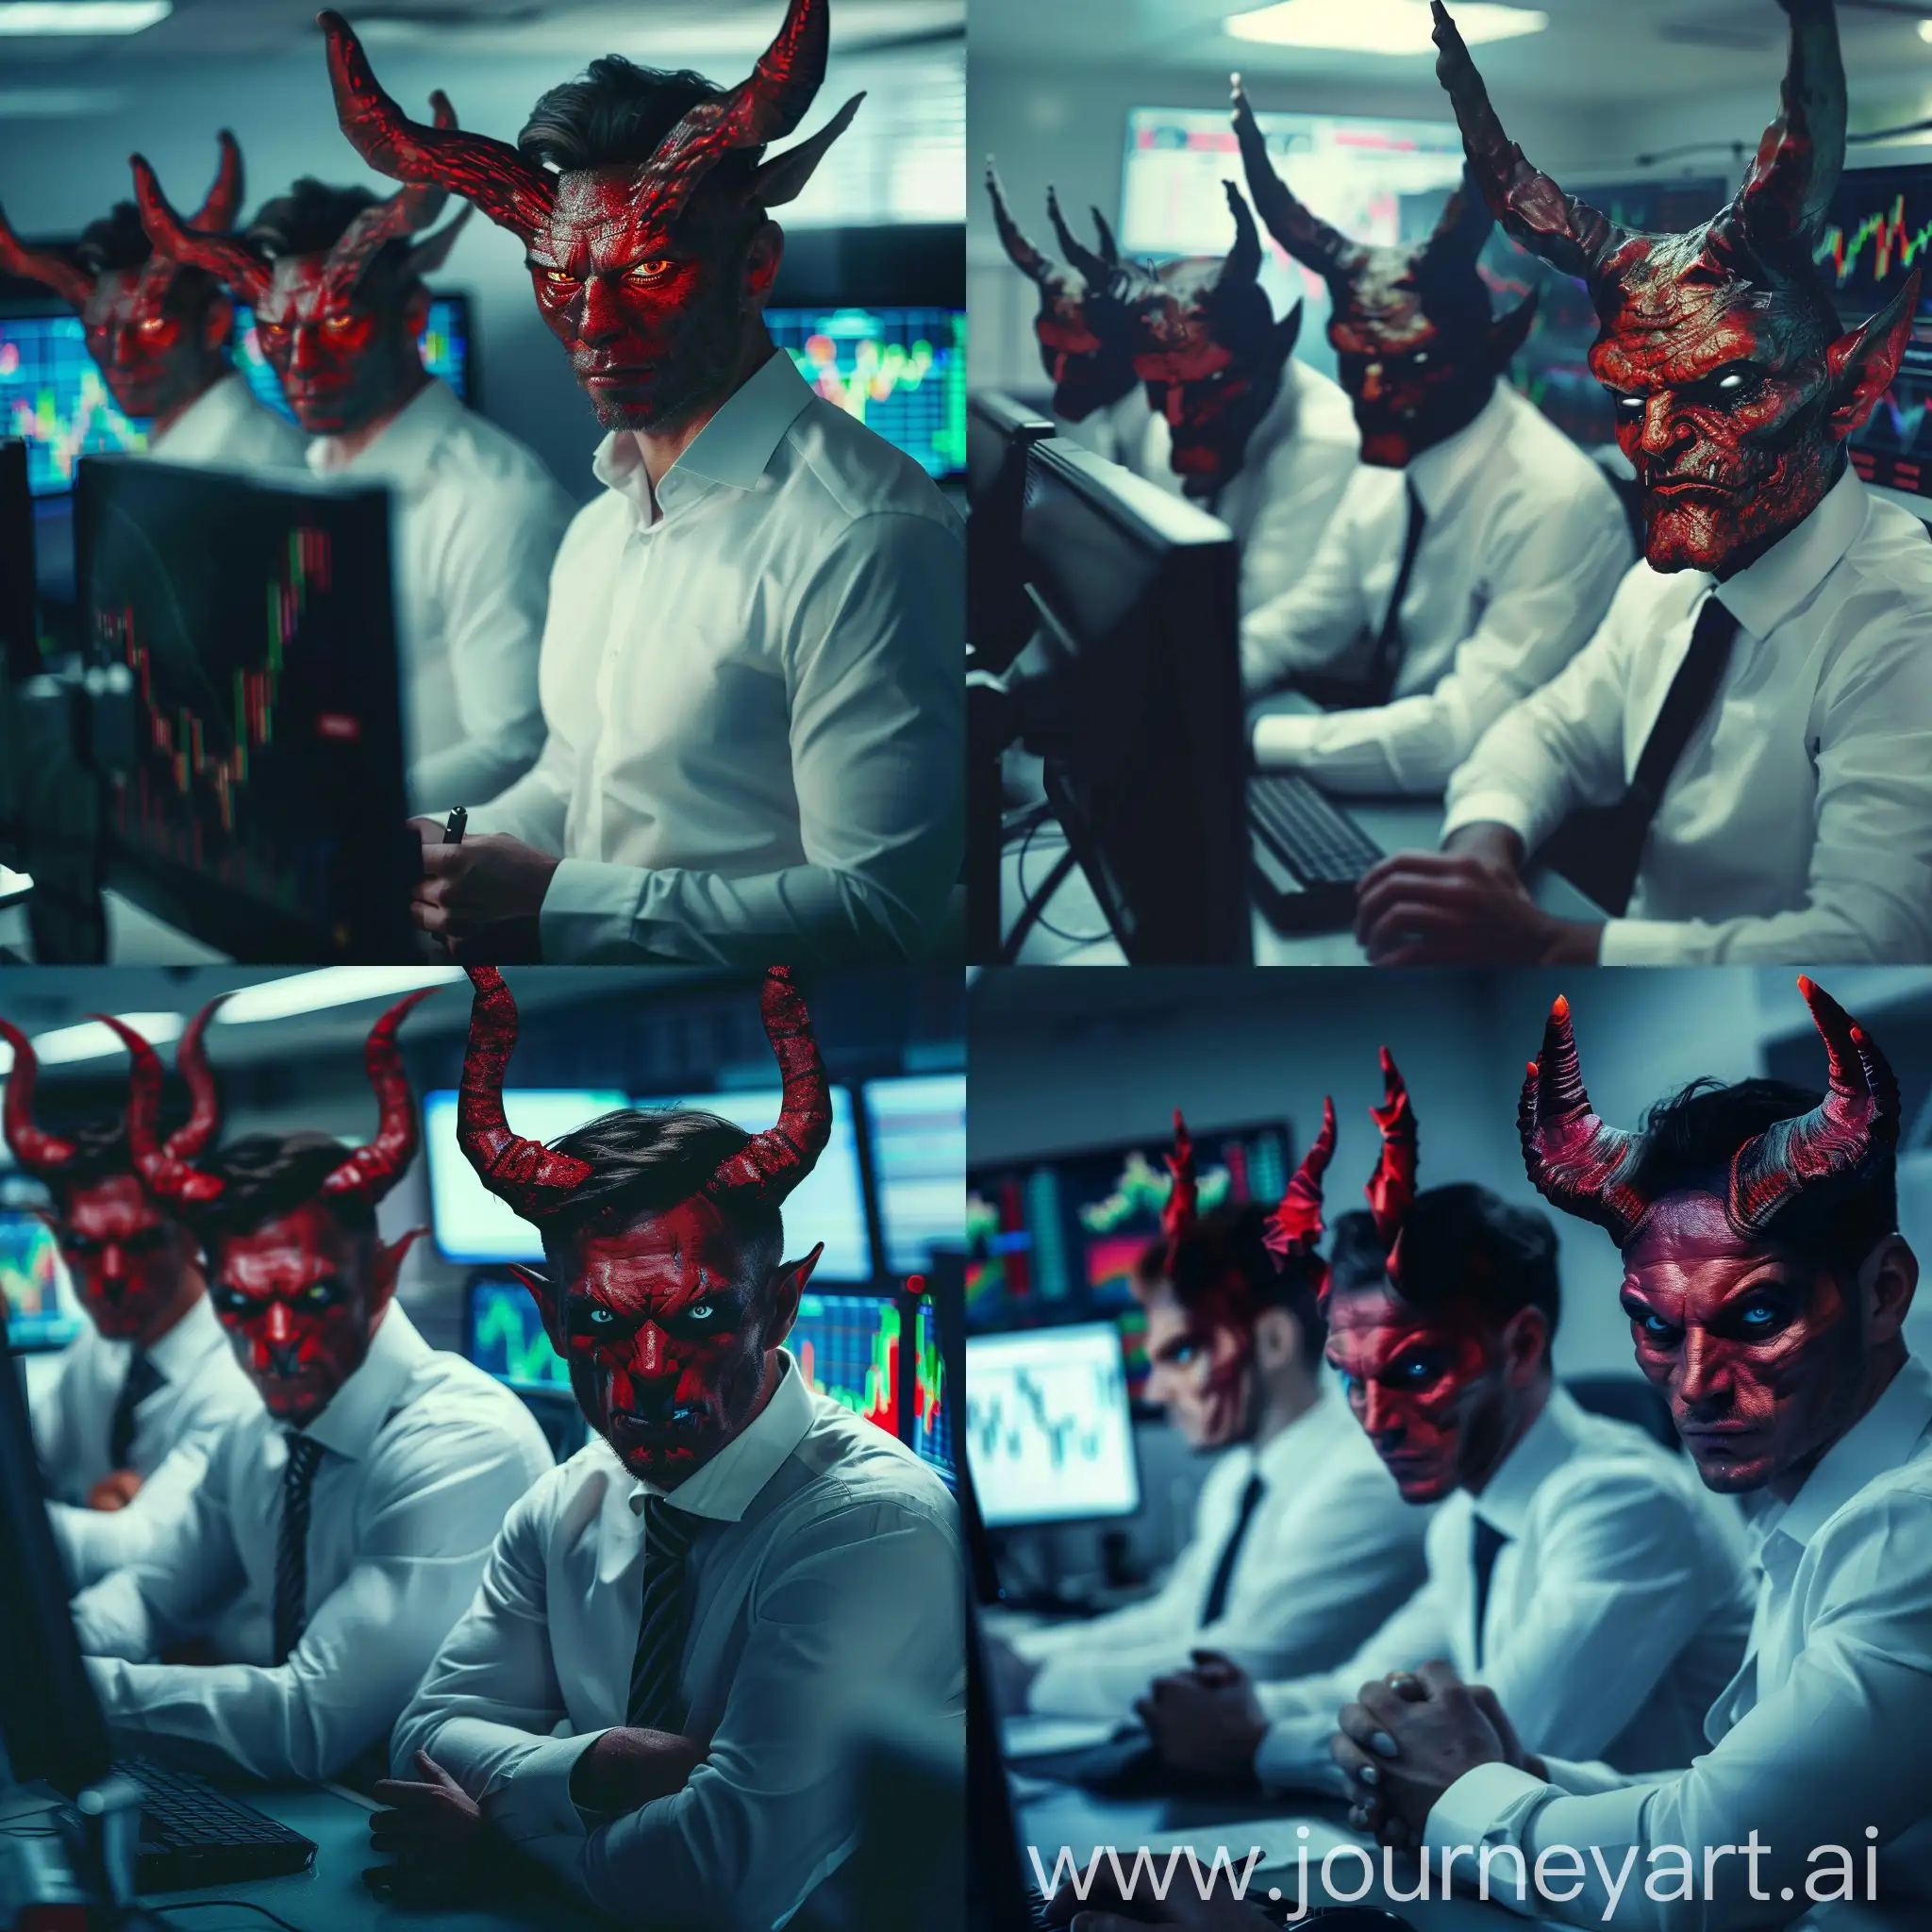 Trading, devil traders, wall street, stocks and markets, beautiful demons, several demons, demons with horns, trading stocks on the wall street, in business white shirts, beautiful, rich traders, monitors with graphs, c looking straight at me, close-up, 4k